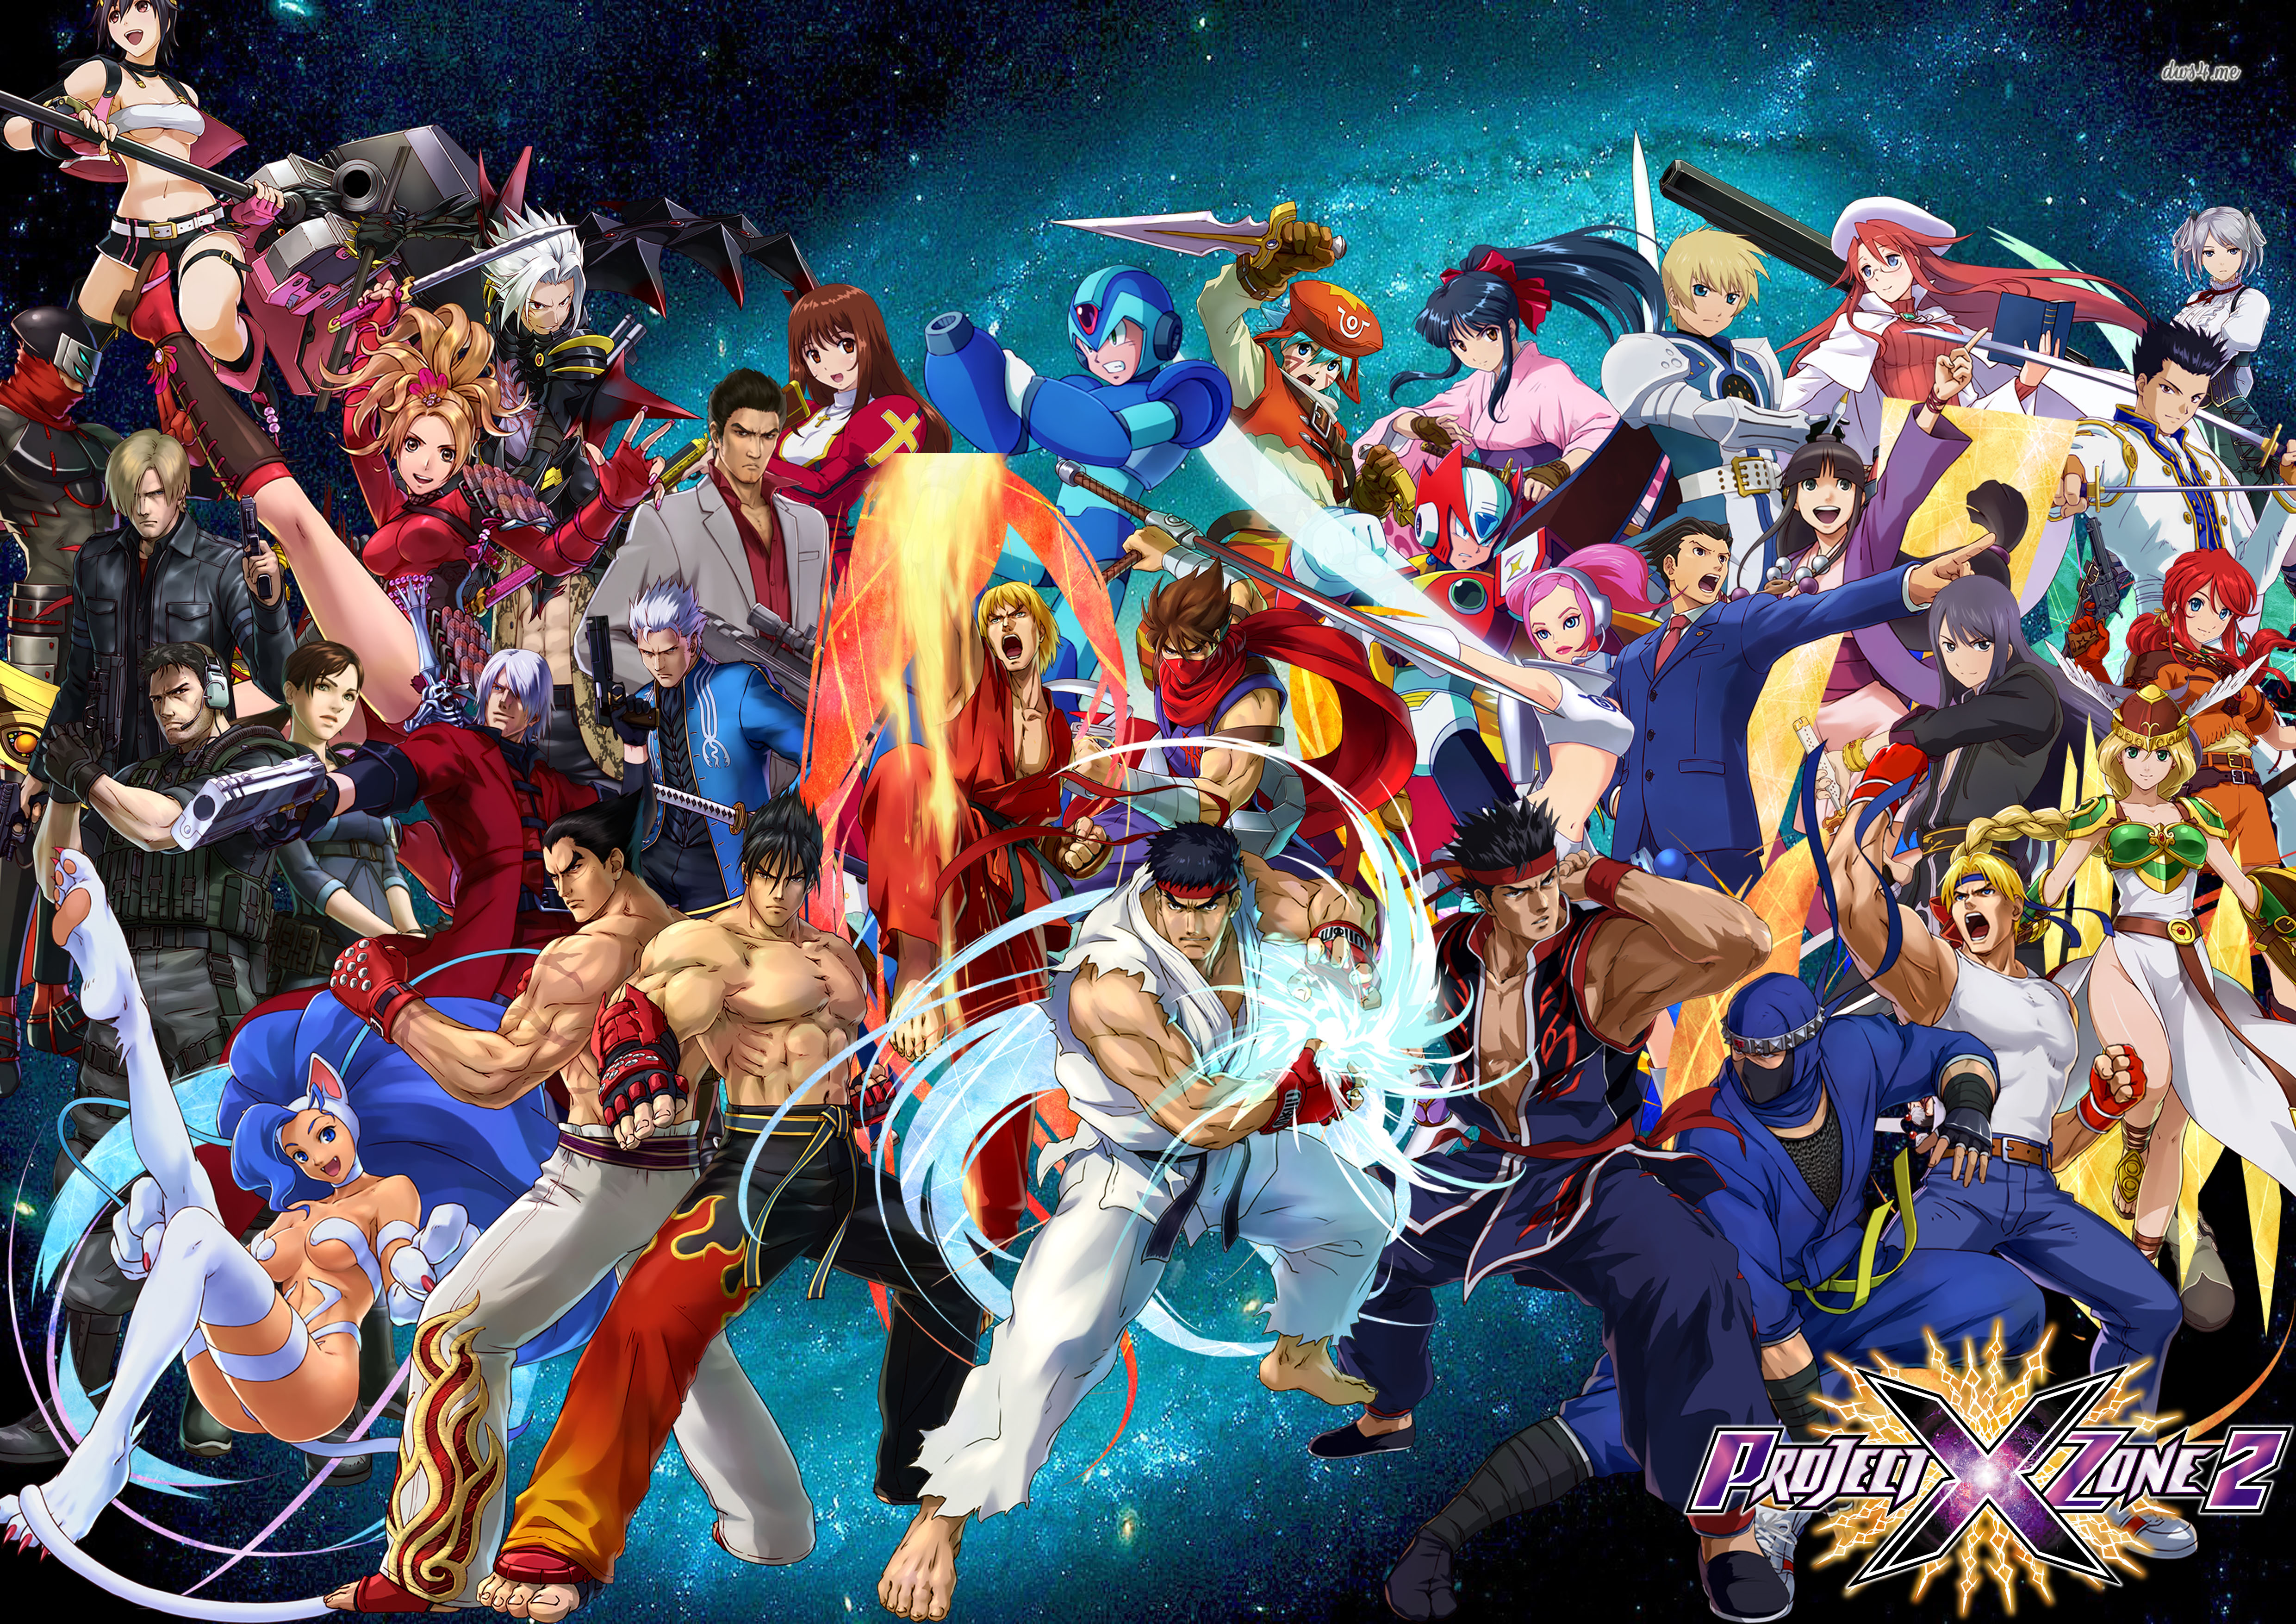 The 58 Playable Characters in Project X Zone 2